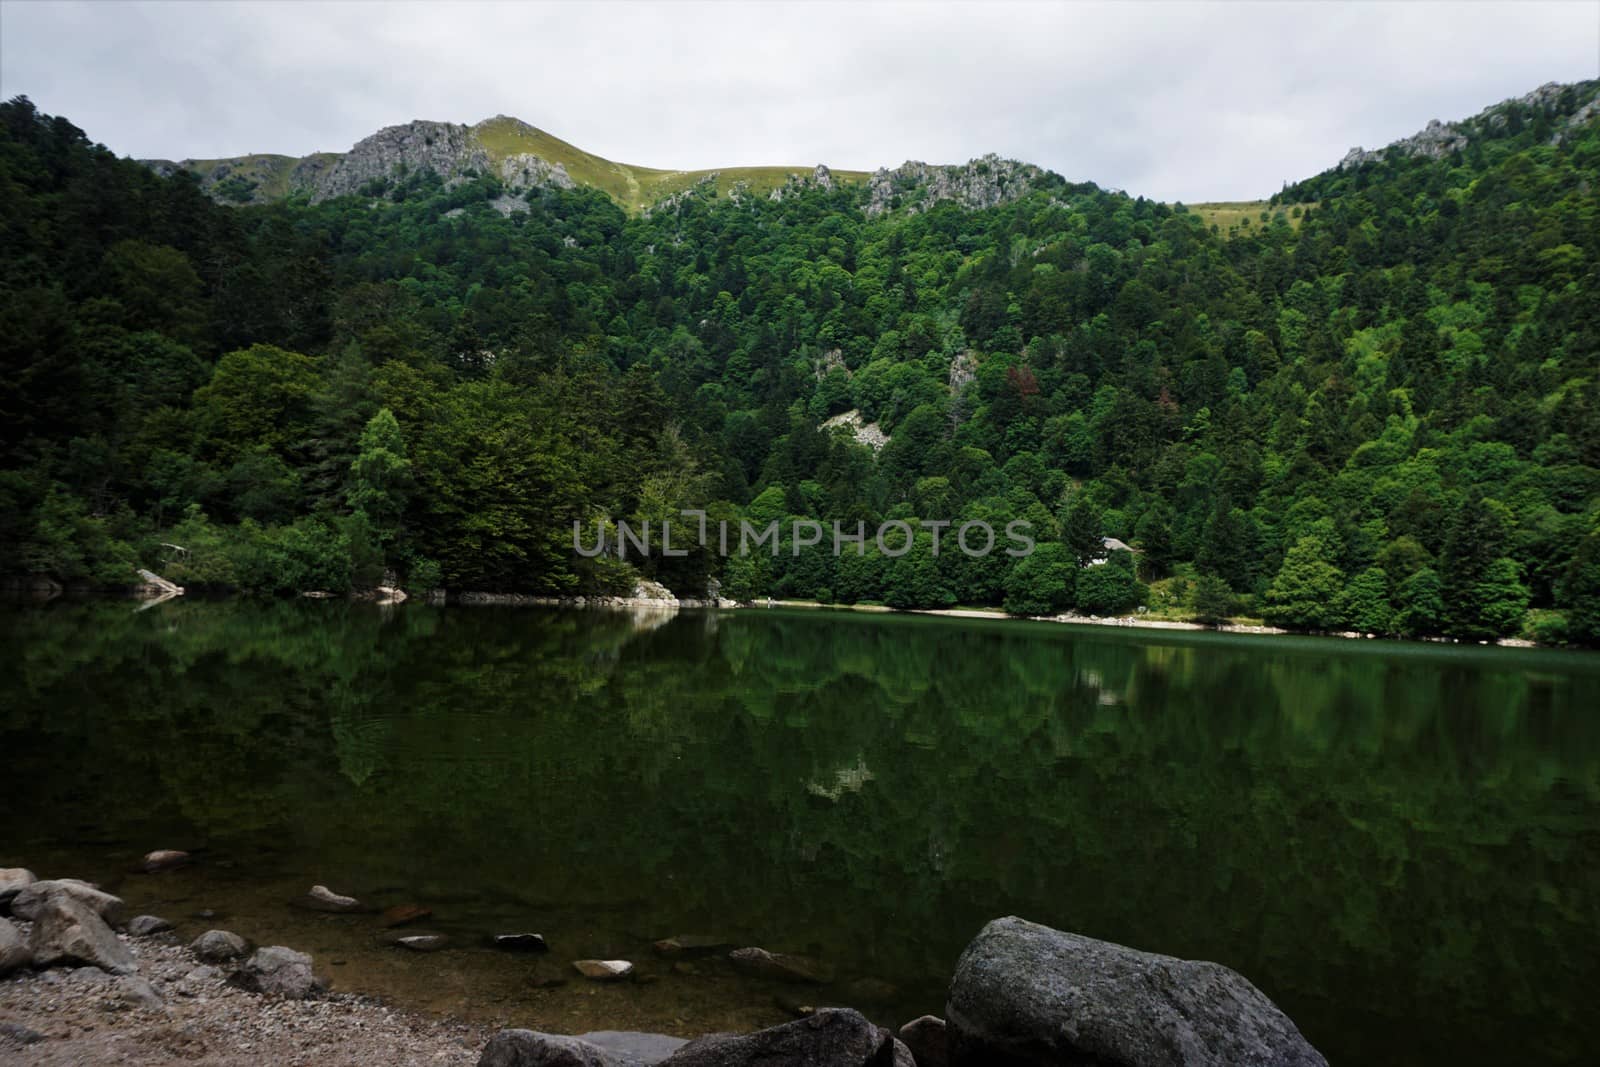 Lac de Schiessrothried - a beautiful lake surrounded by mountains by pisces2386